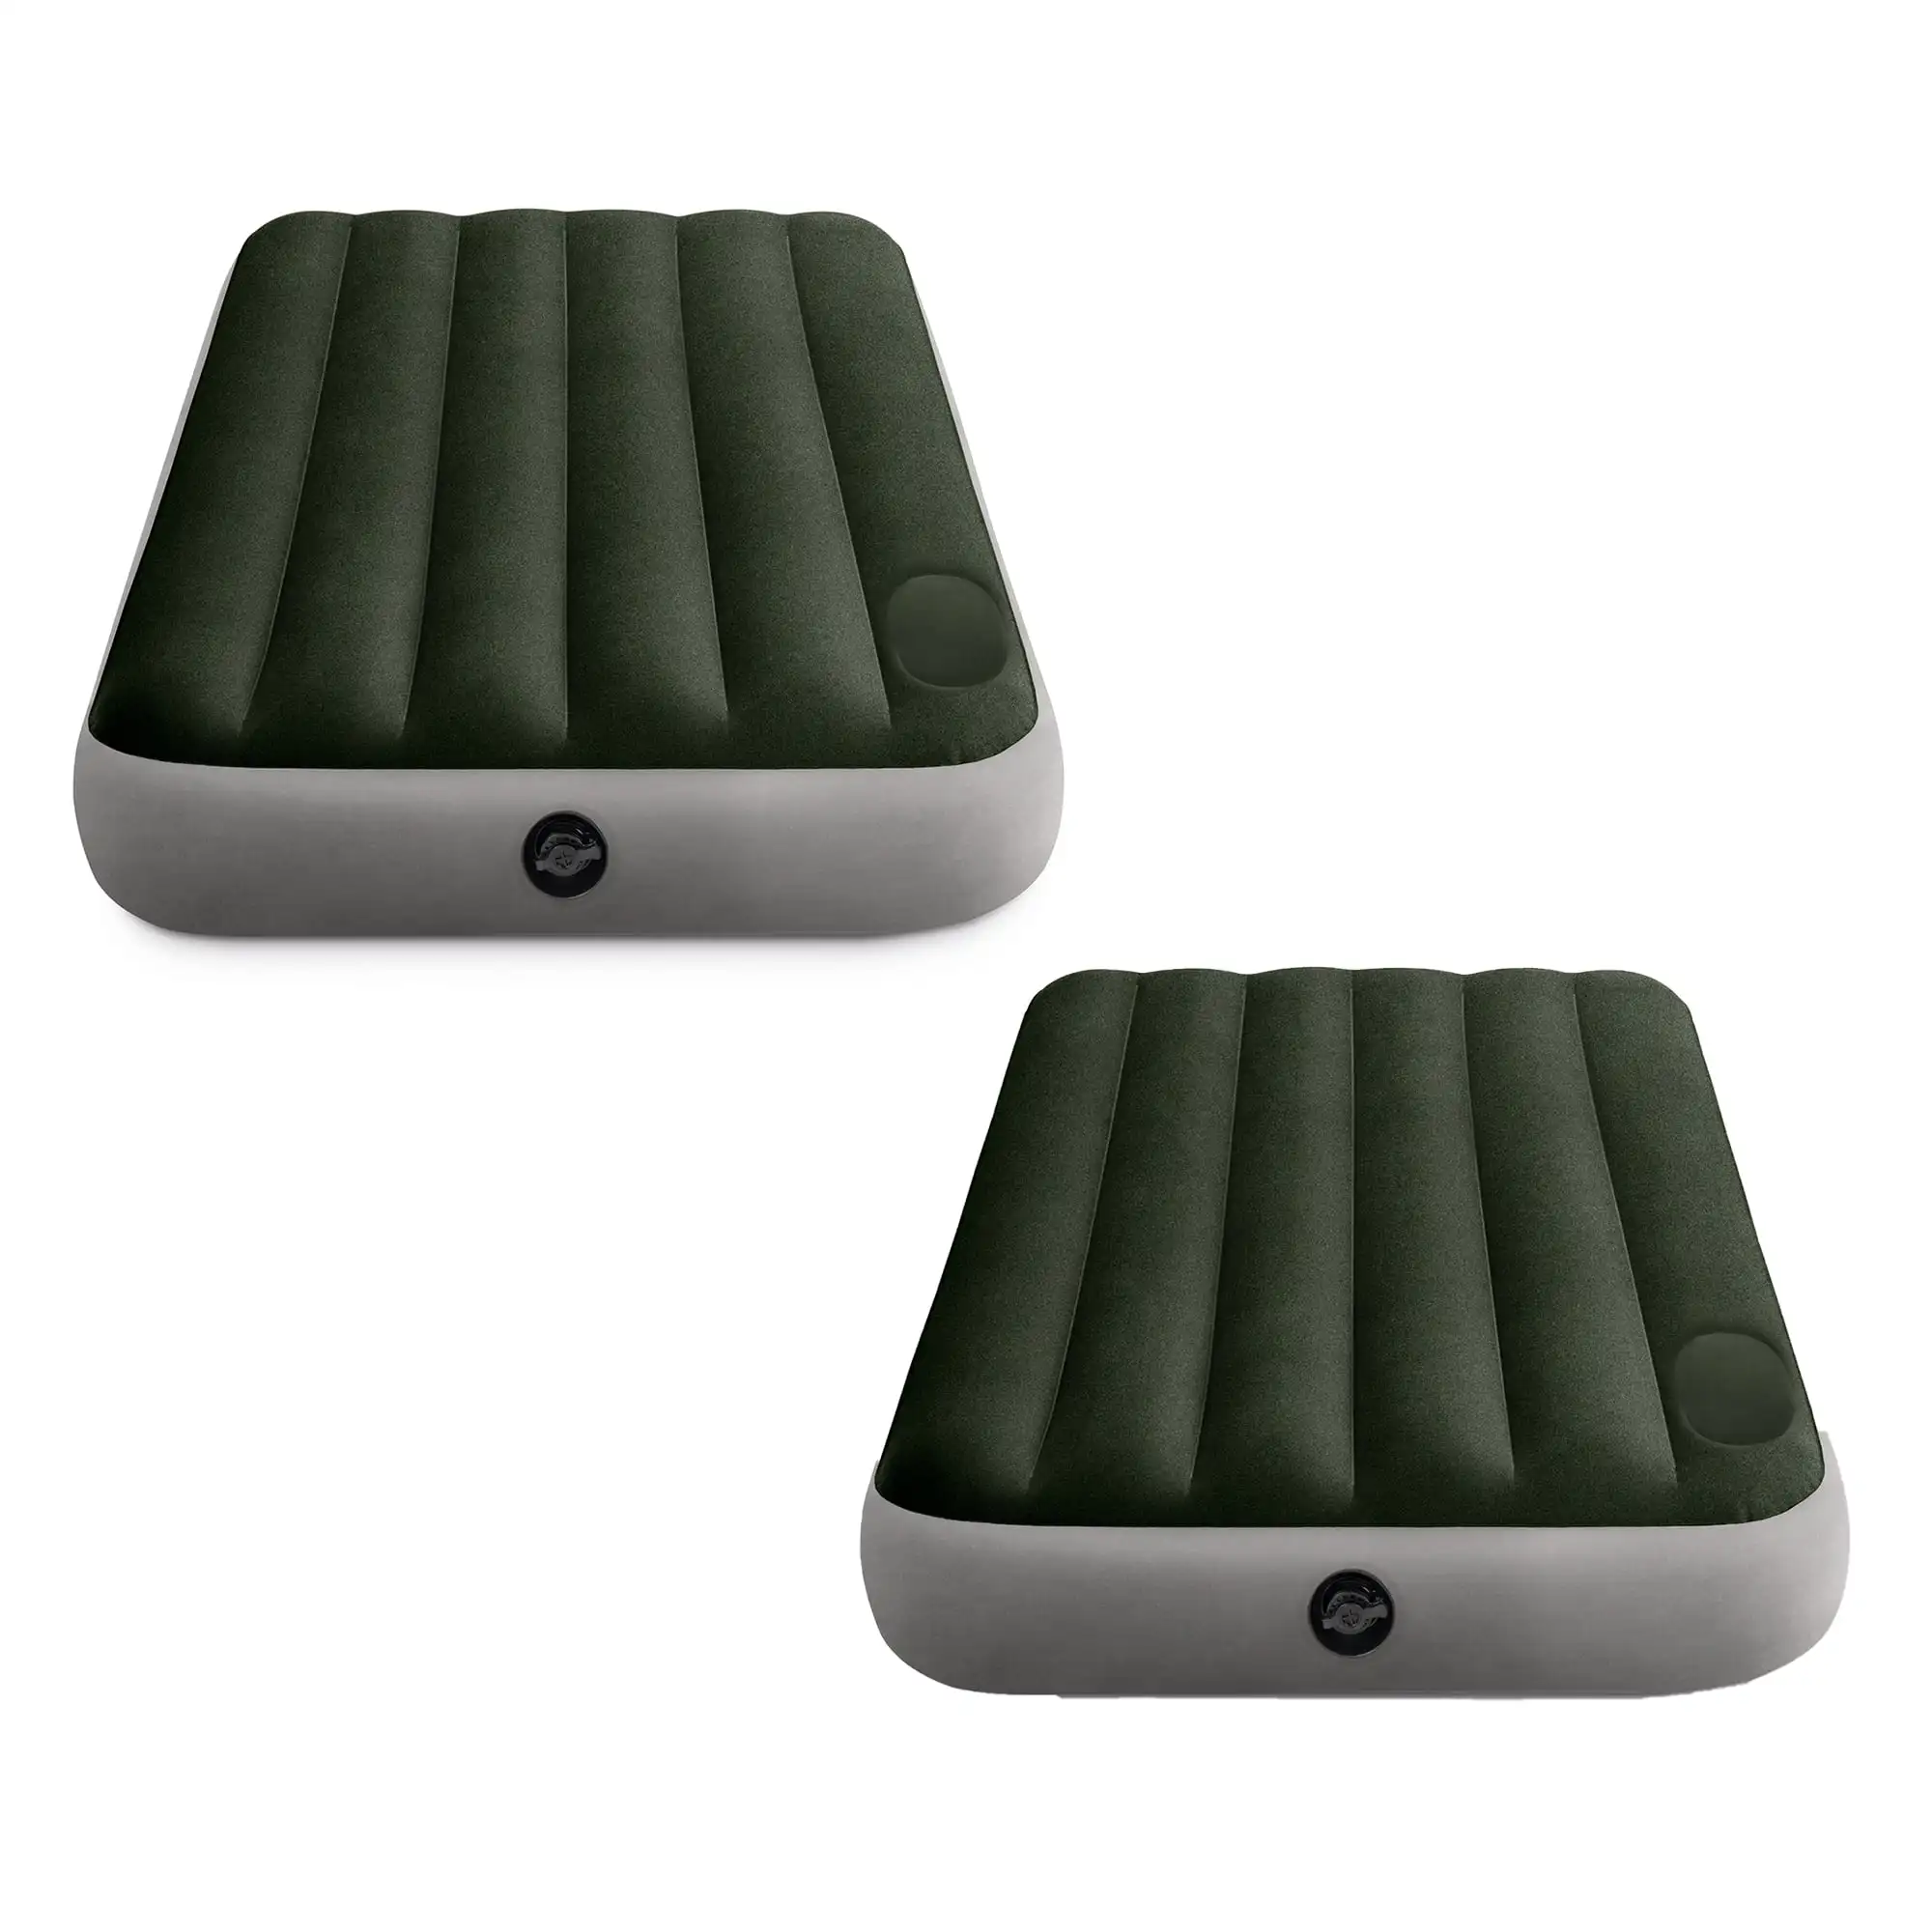 Dura-Beam Standard Downy Airbed w/ Built-In Foot , Twin Size (2 Pack)